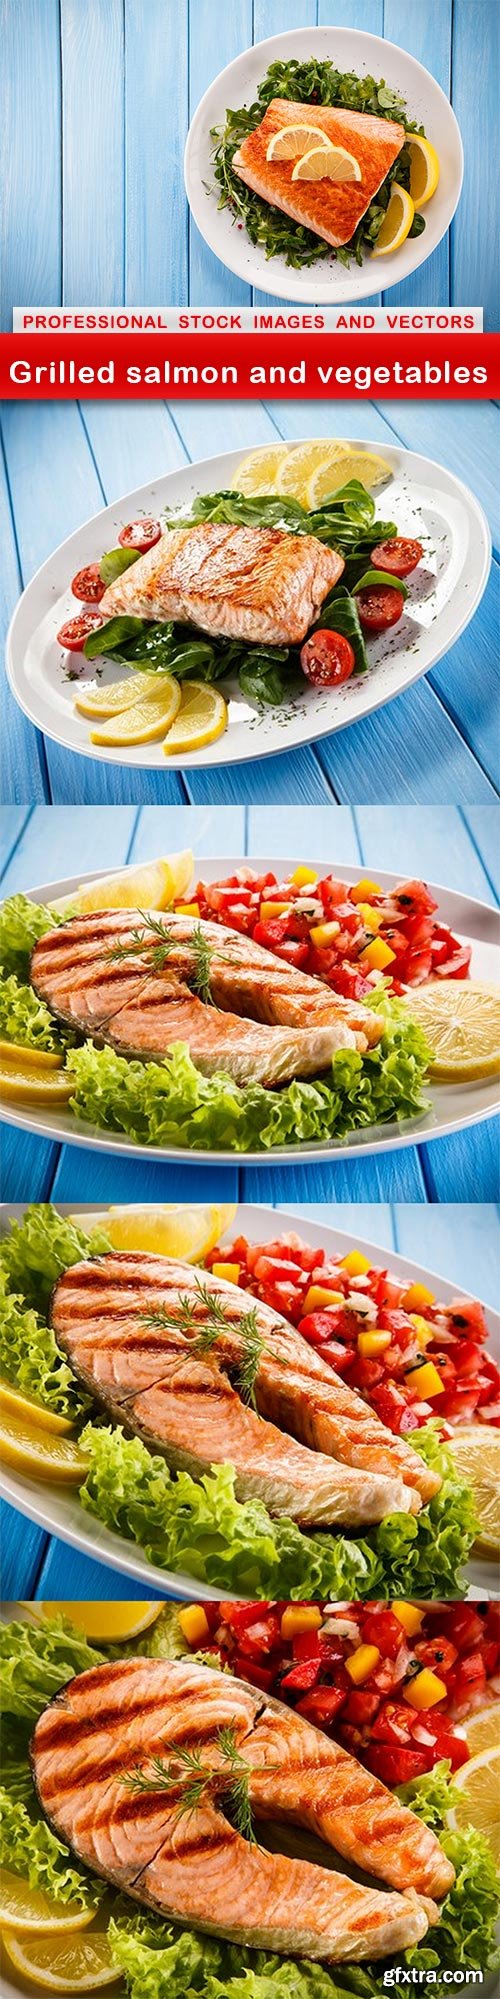 Grilled salmon and vegetables - 5 UHQ JPEG